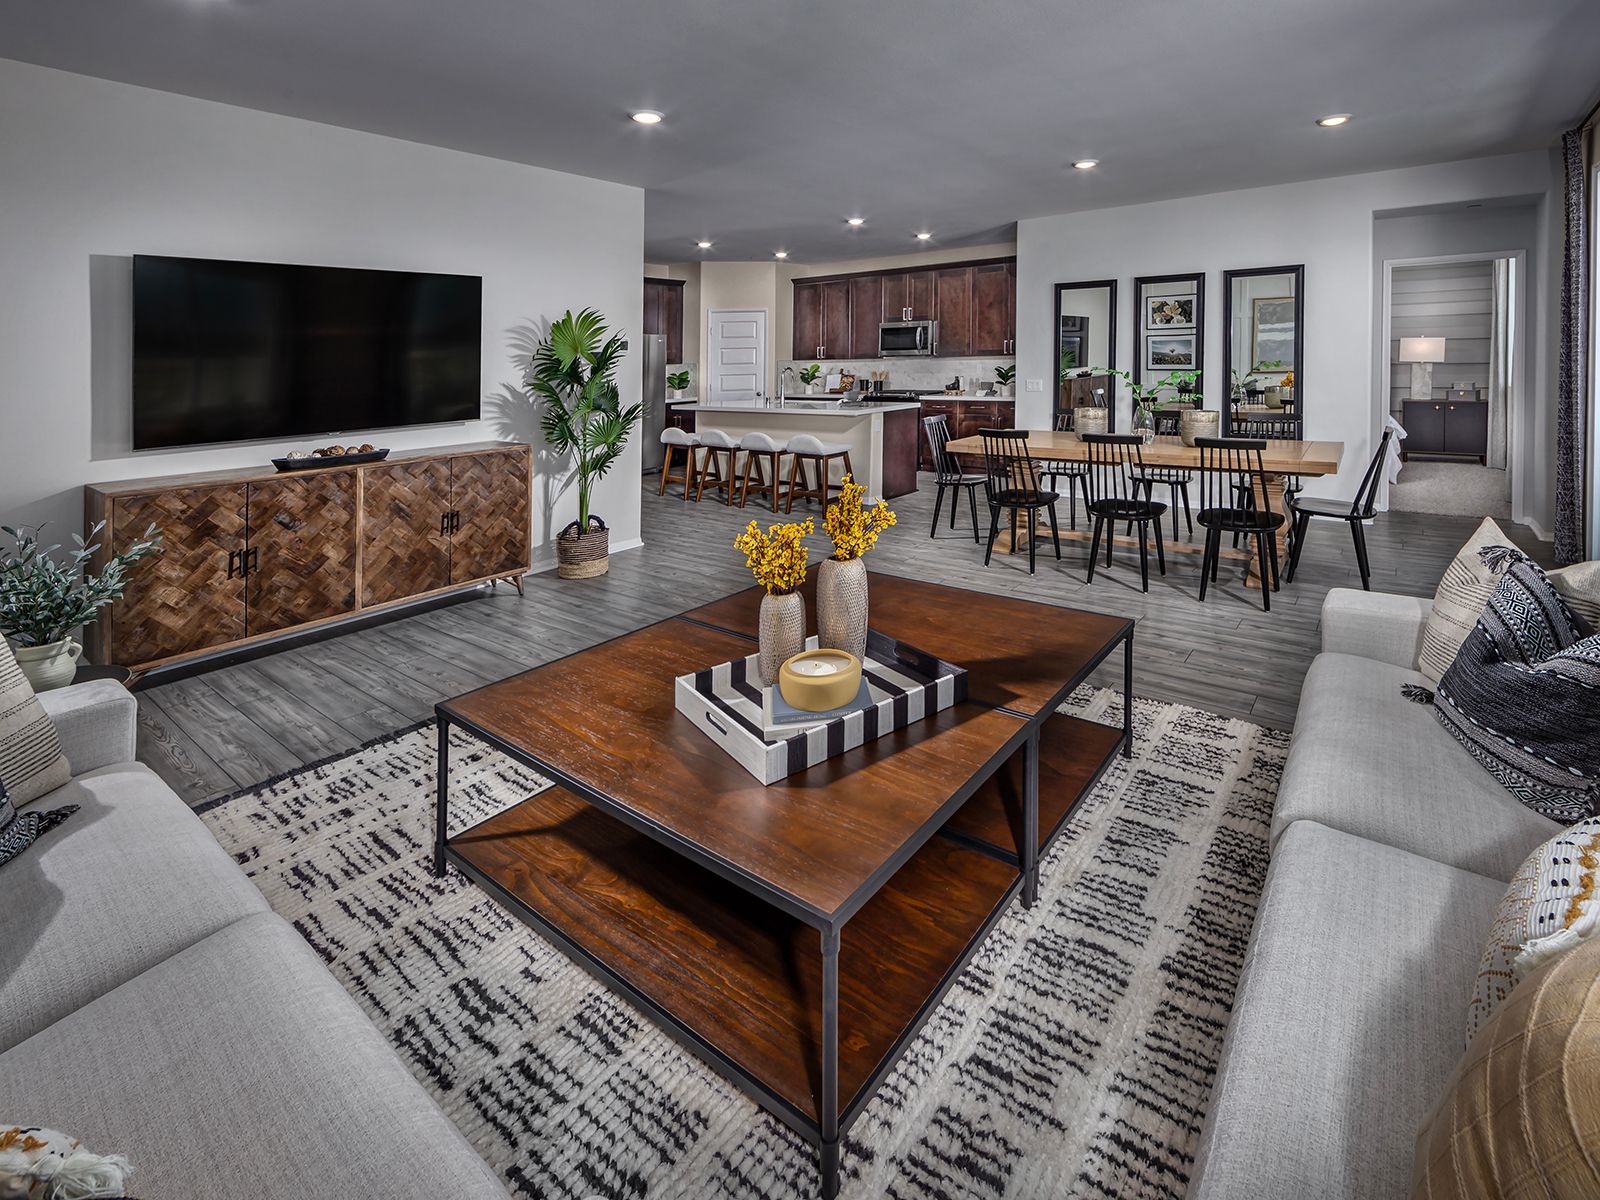 Host family gatherings in your open-concept home.